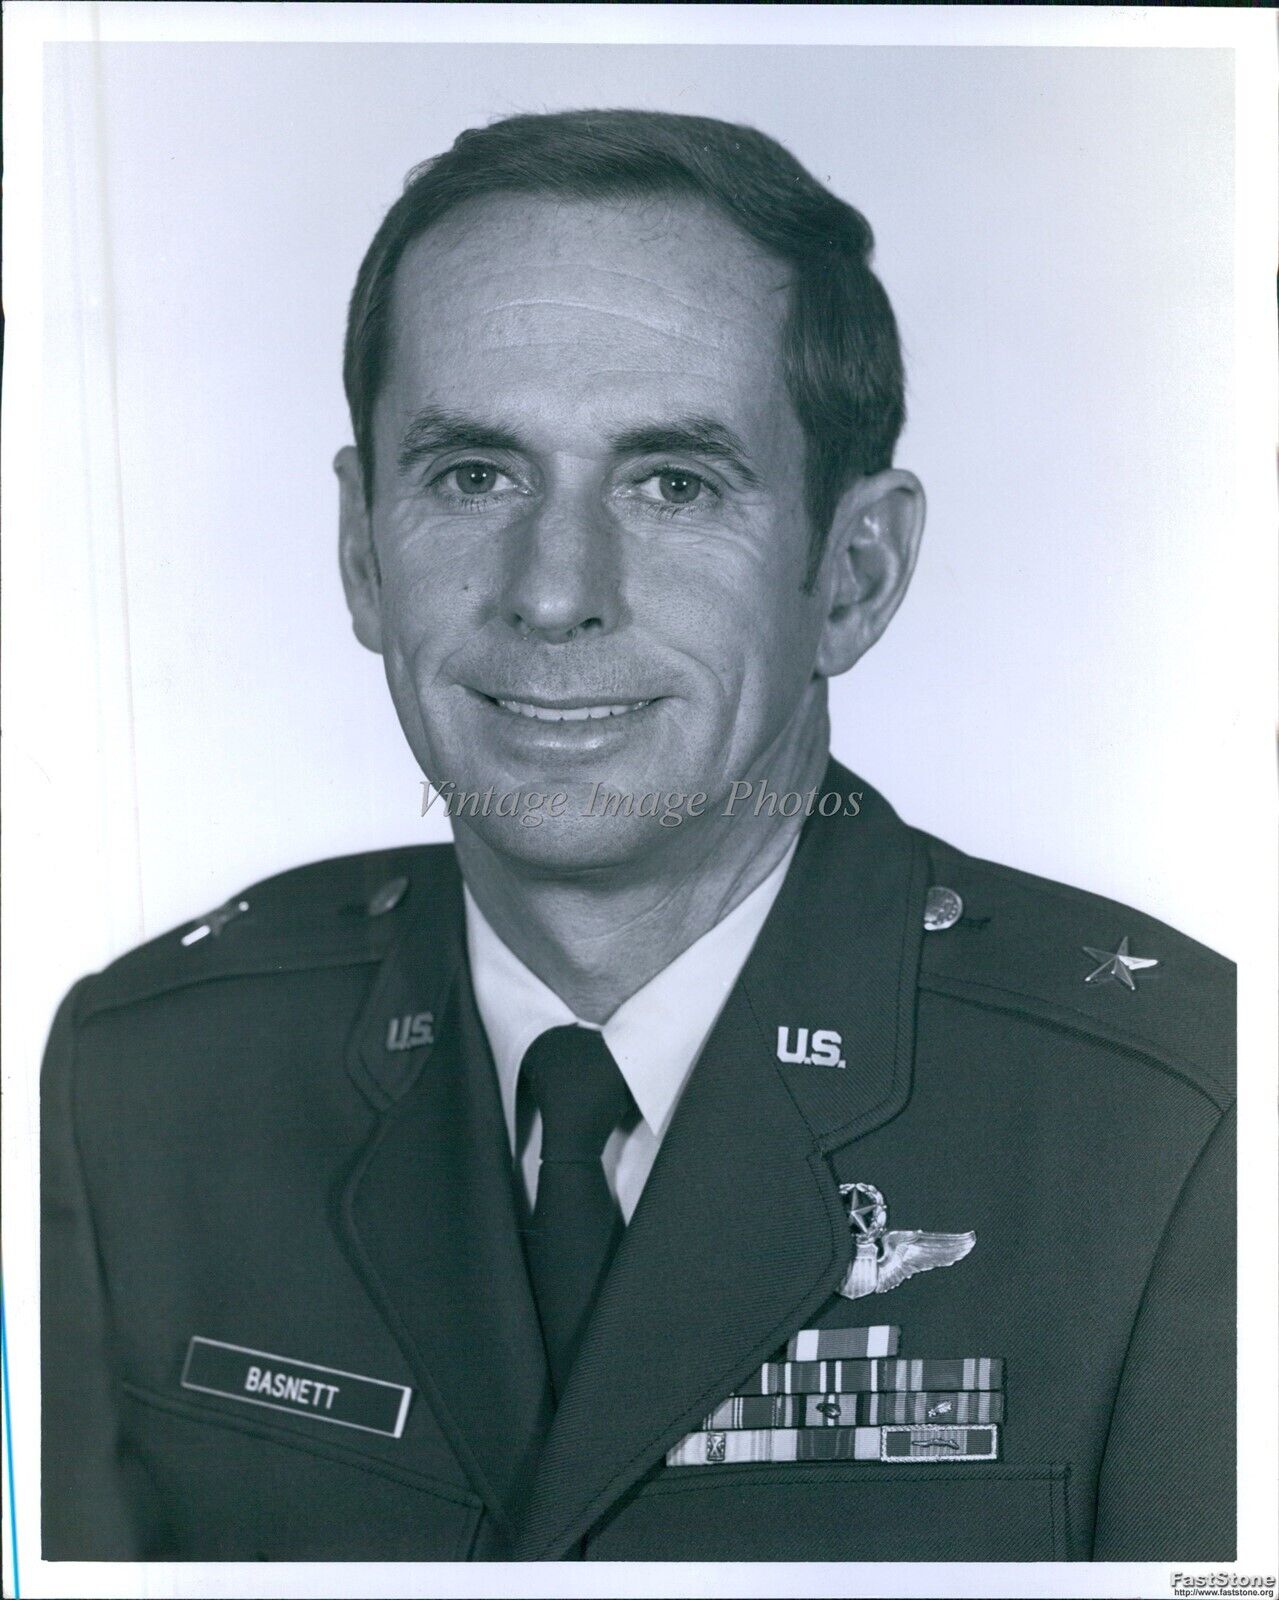 1982 Brig Gen William W Basnett 94Th Tactical Airlift Wing Military Photo 8X10